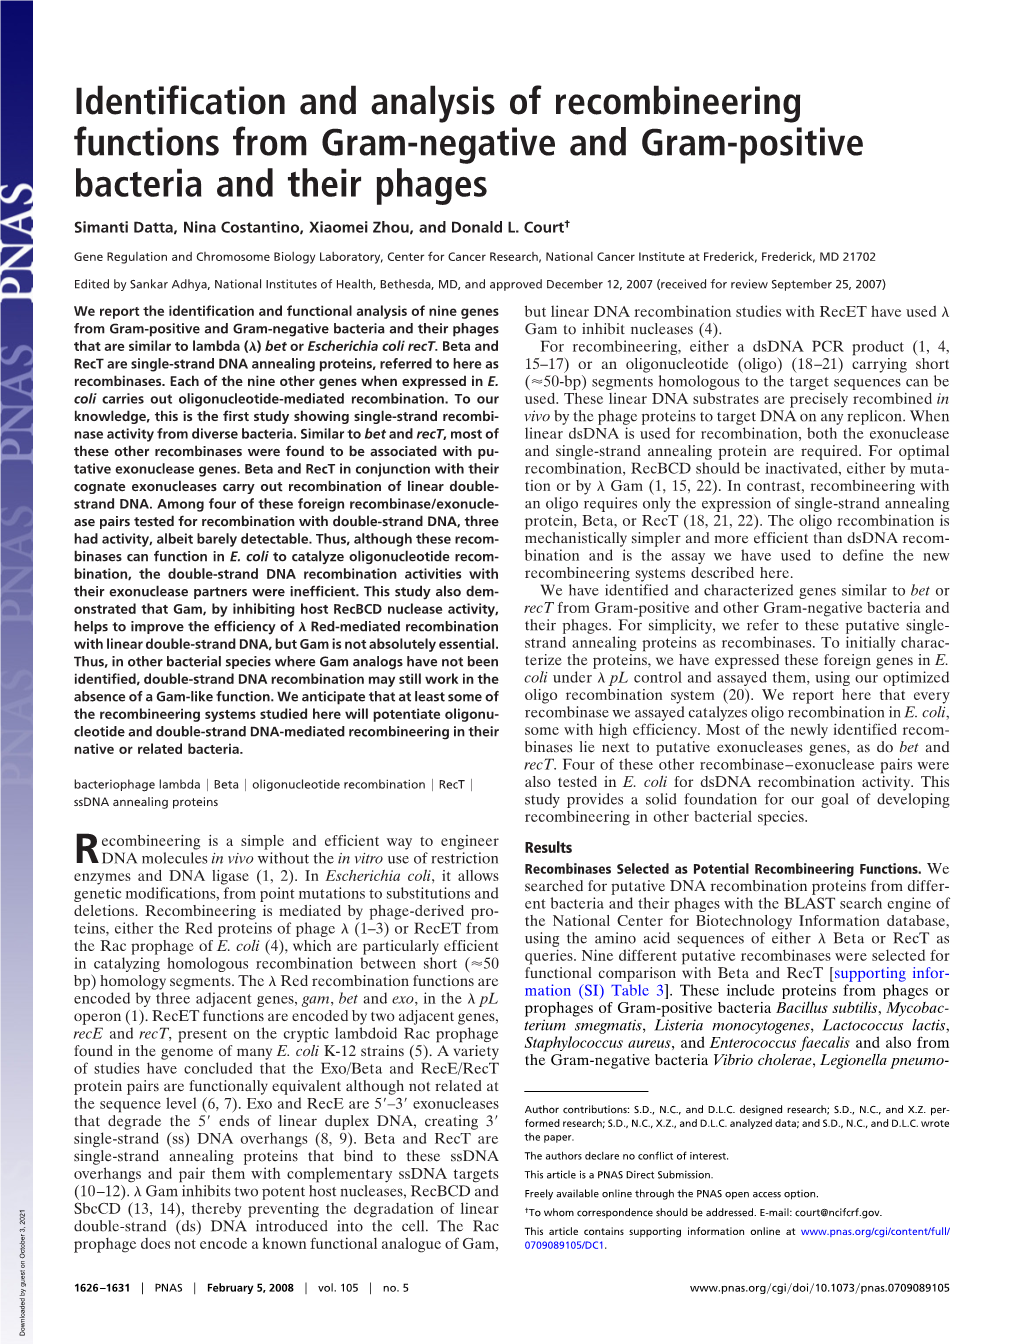 Identification and Analysis of Recombineering Functions from Gram-Negative and Gram-Positive Bacteria and Their Phages